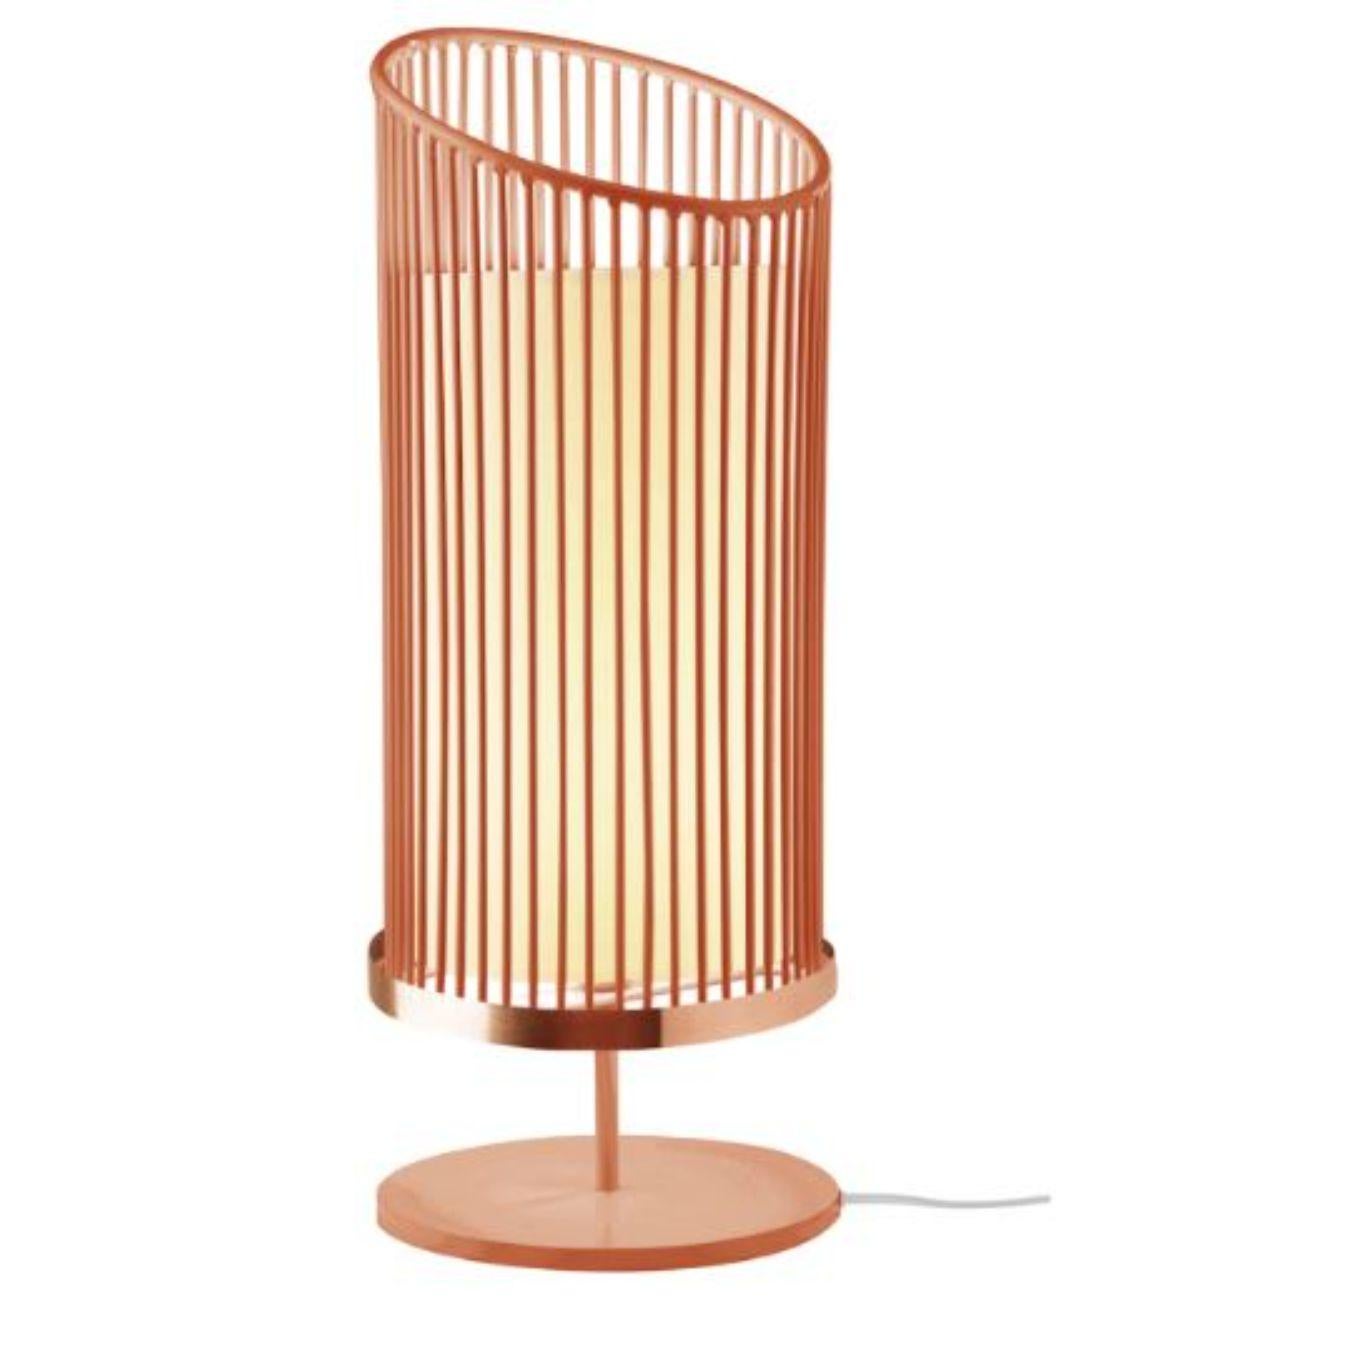 Lipstick New Spider Table Lamp with Brass Ring by Dooq For Sale 2